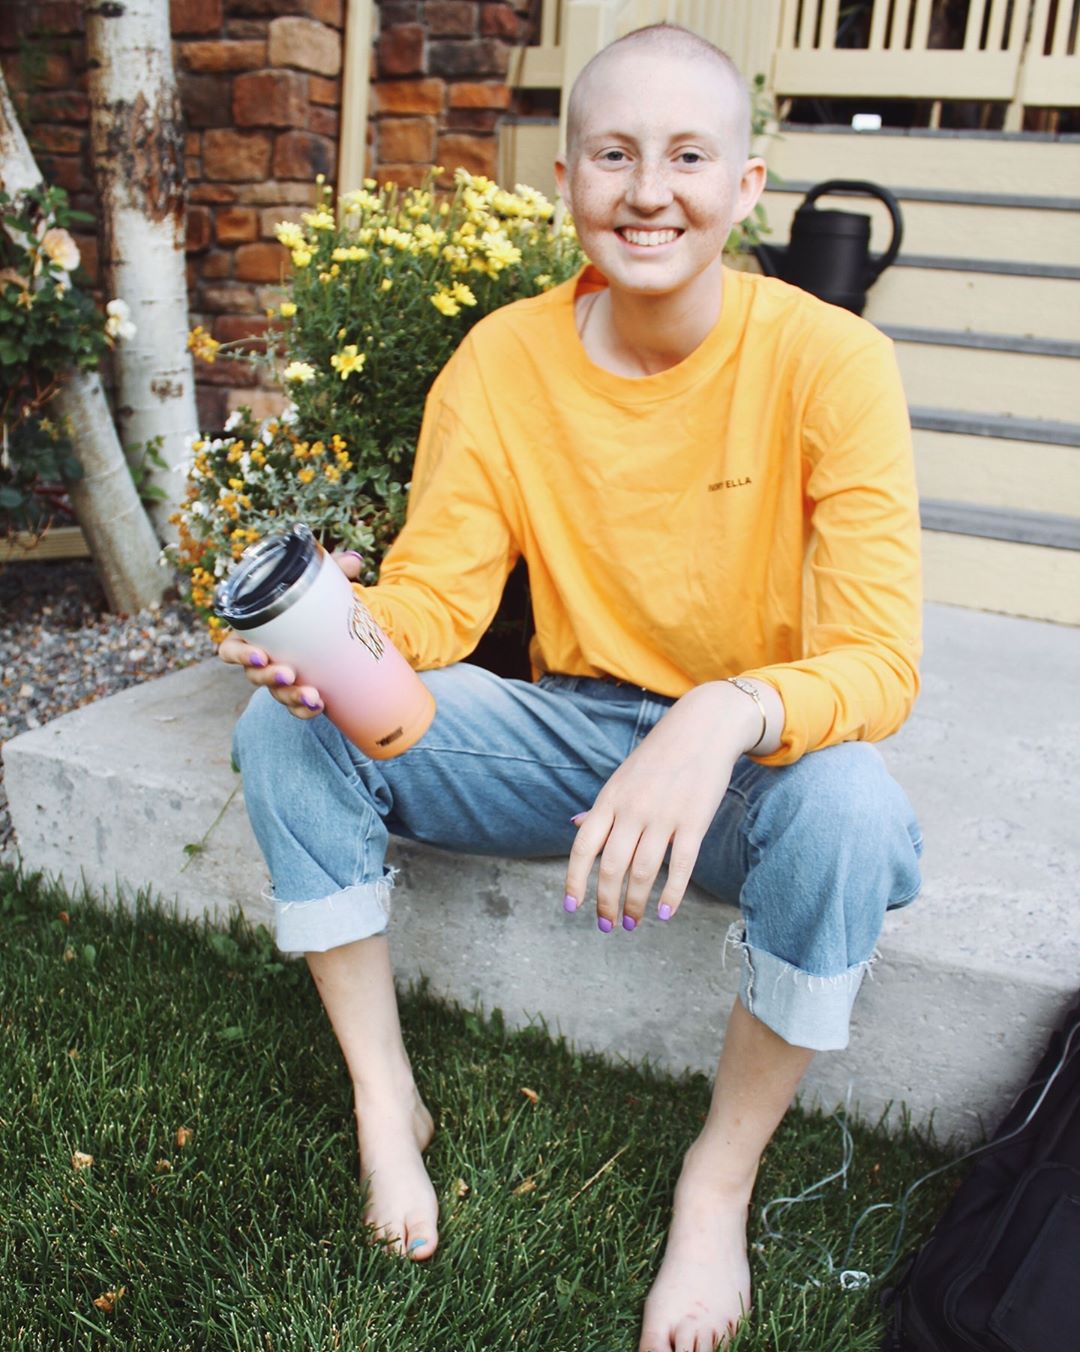 Ivory Ella - Meet Campbell. She is 18 years old and has been battling a rare form of cancer since 2017. We love Campbell's heart for Childhood Cancer Awareness. As an avid skier, she combined one of h...